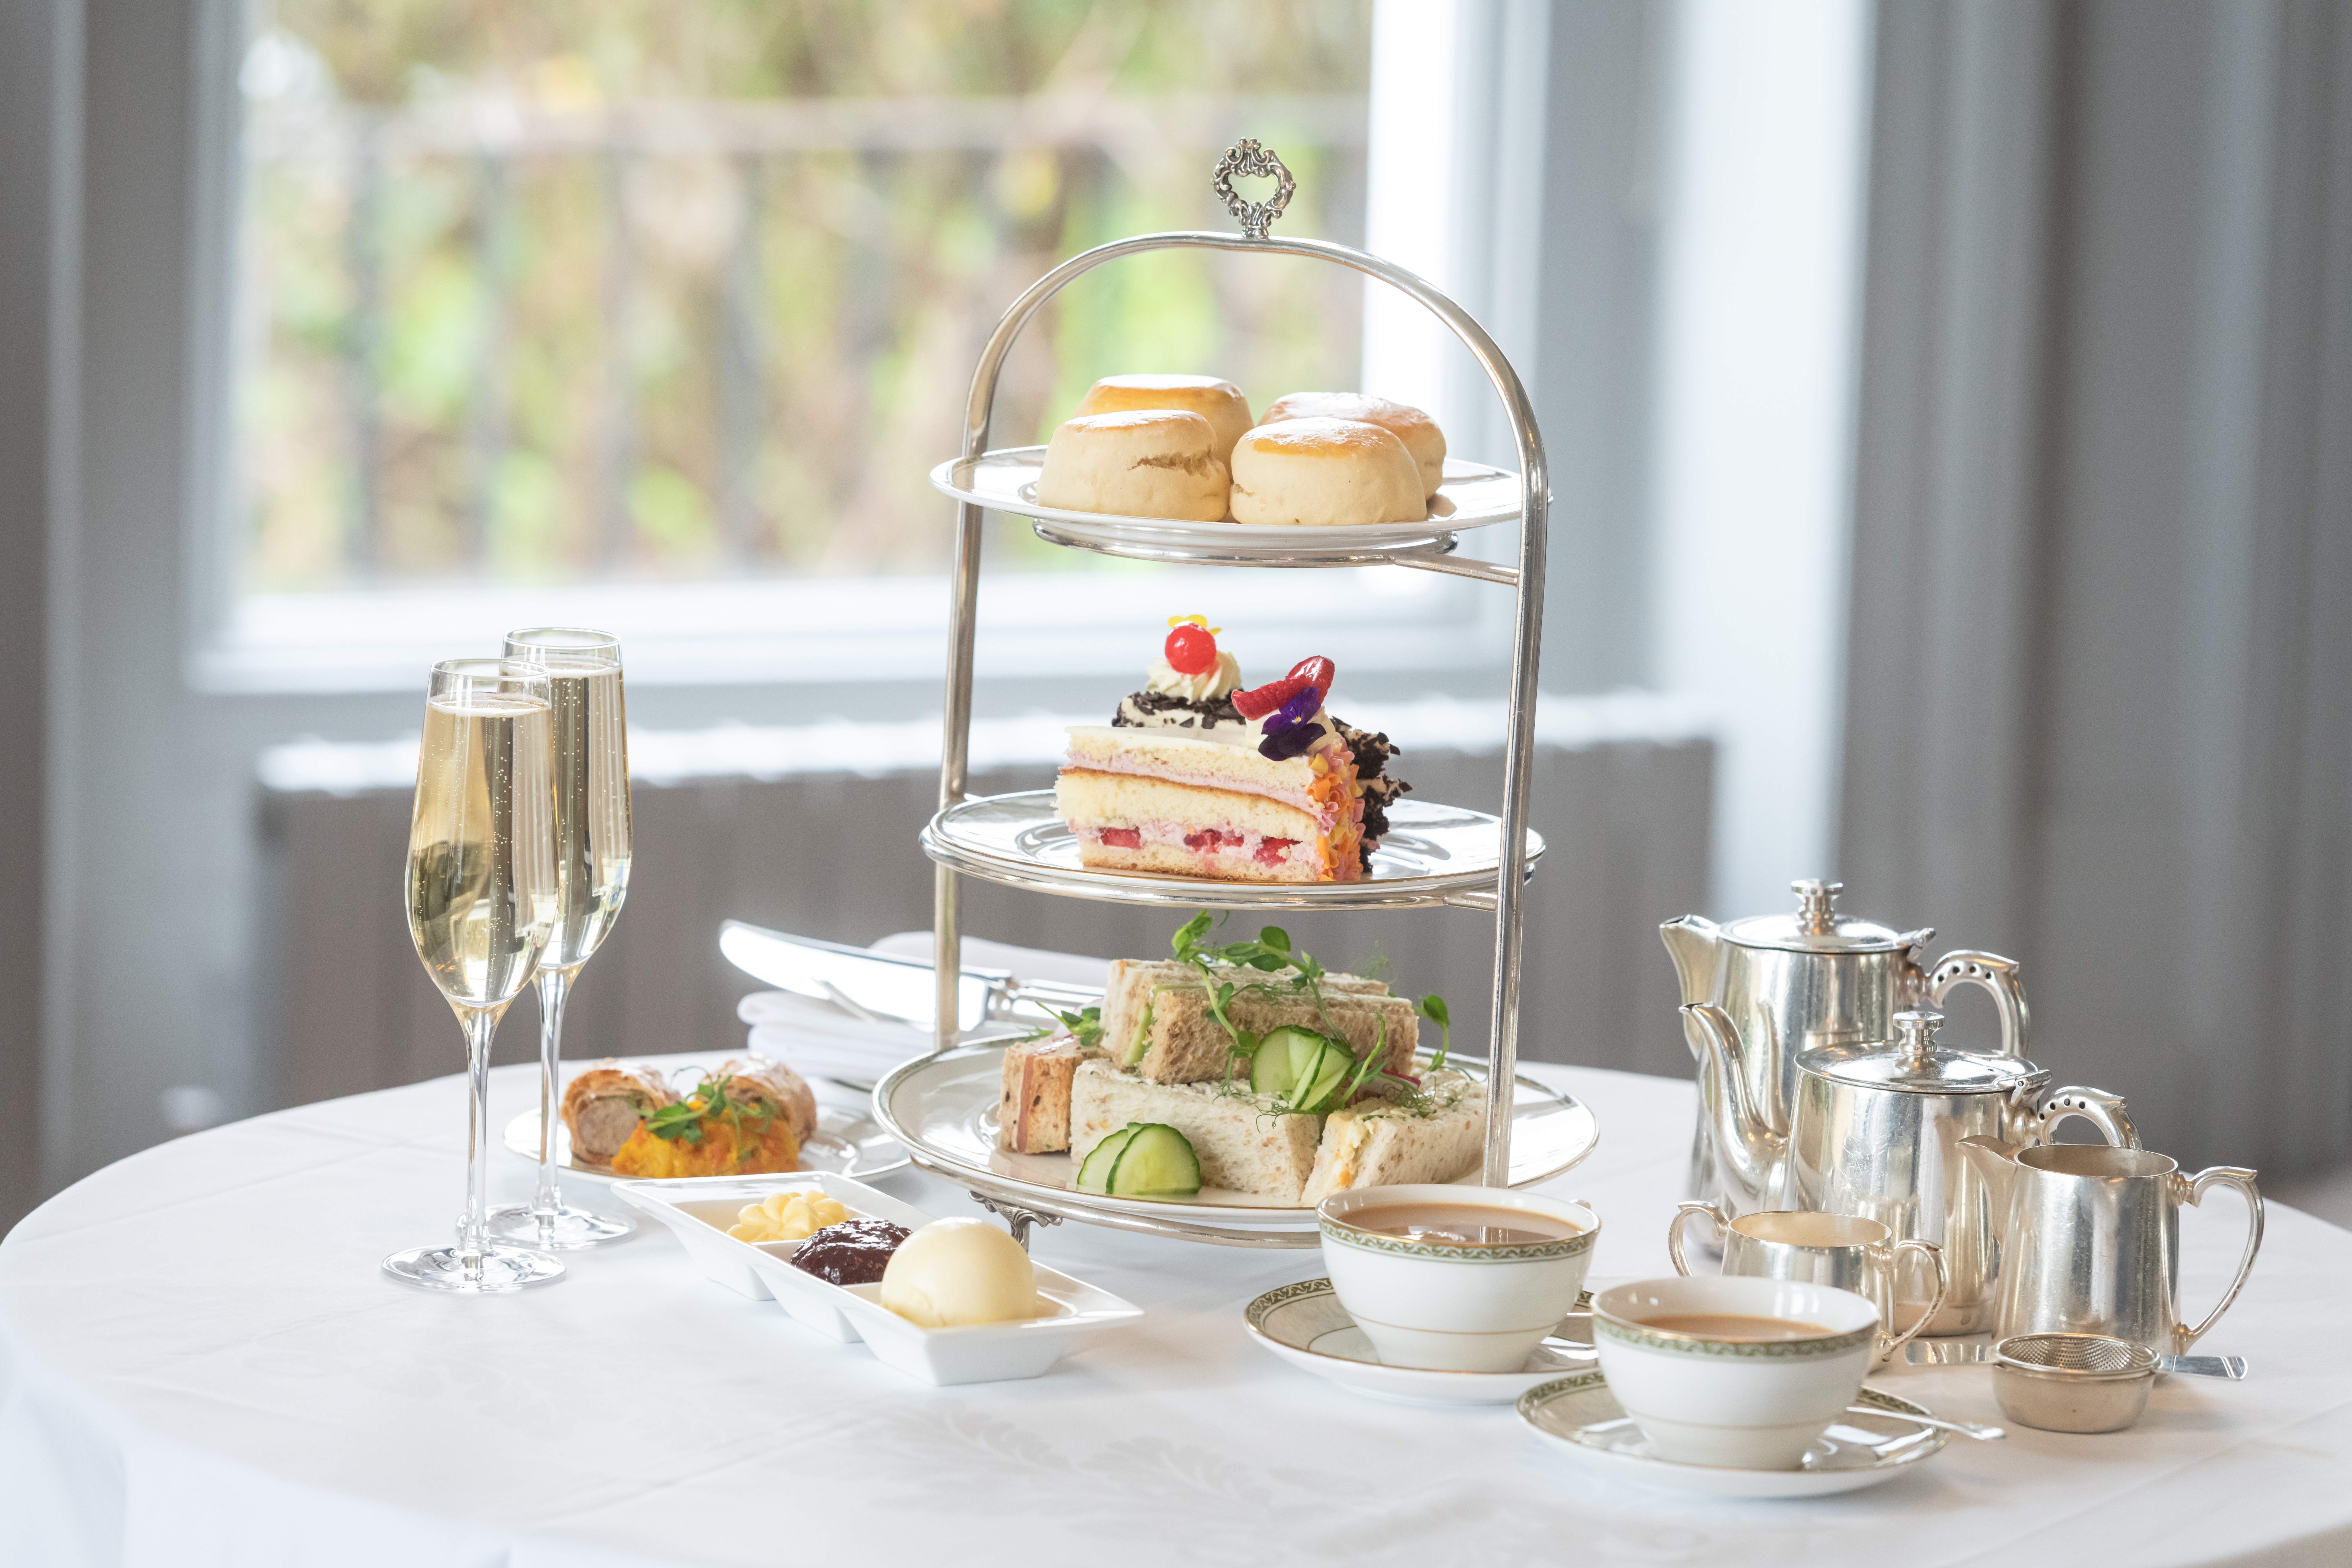 Canard-Duchêne Champagne Afternoon Tea For Two (Monday to Thursday)